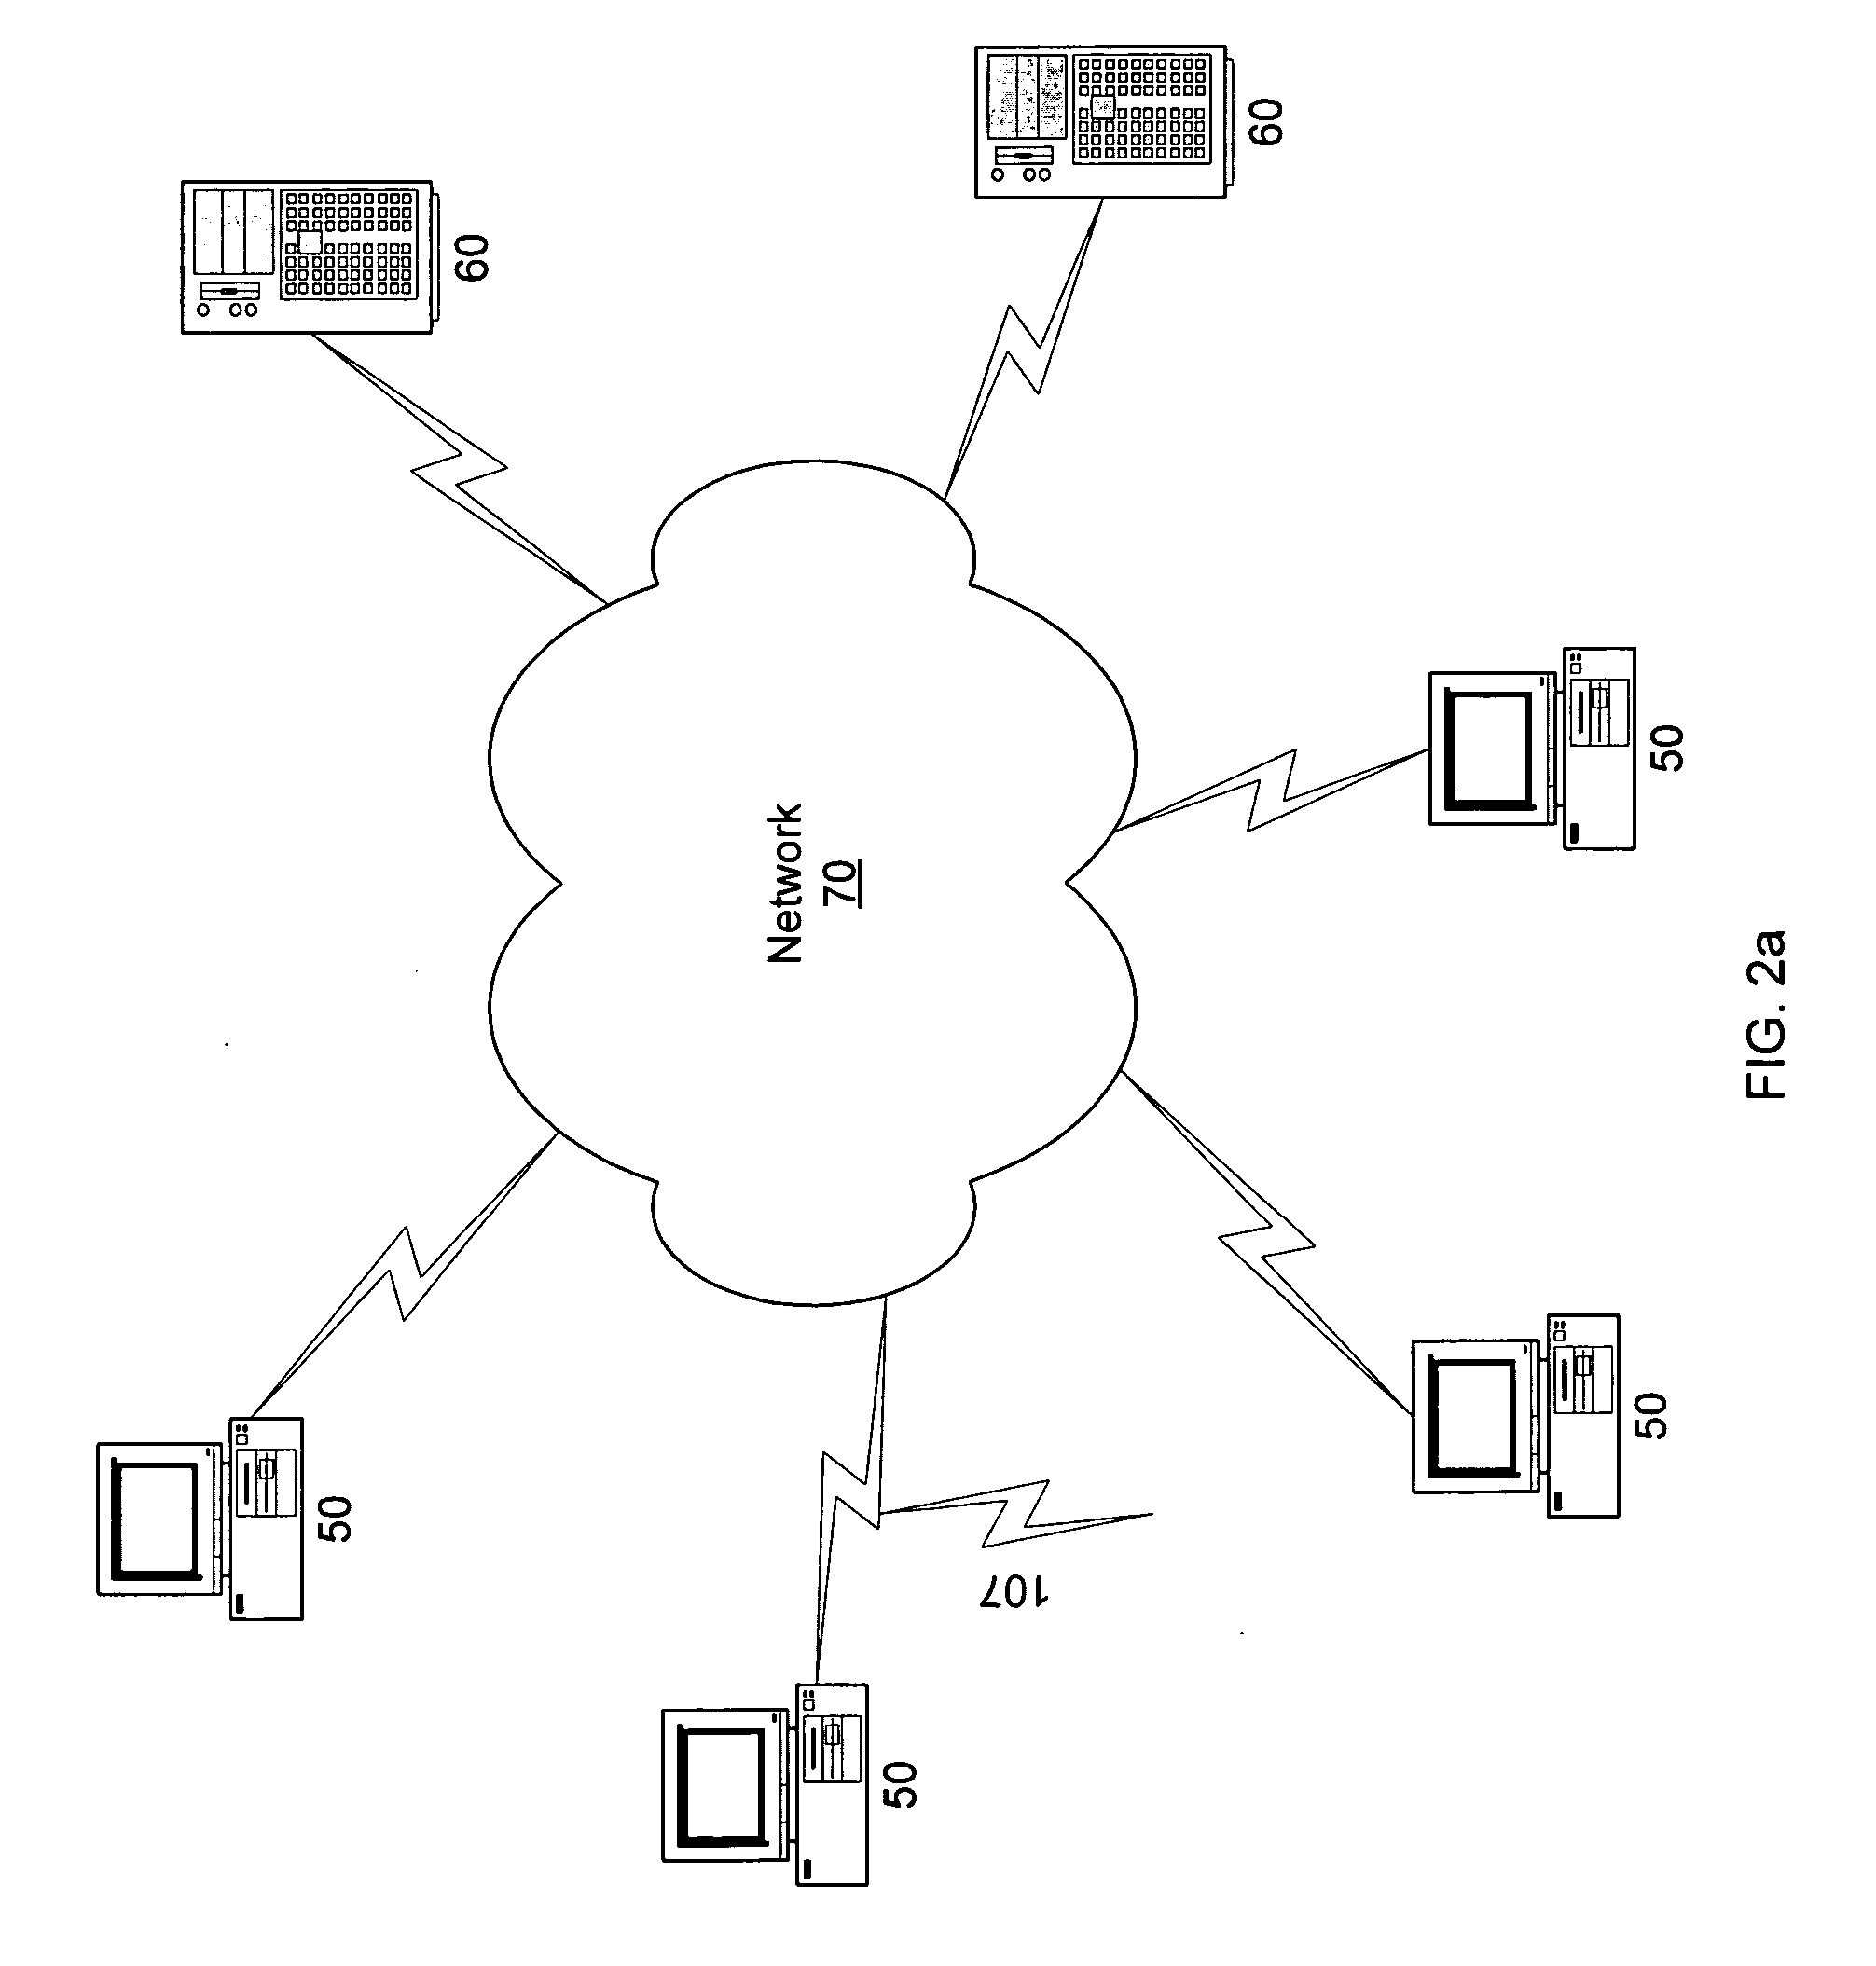 Computer method and system for integrating software development and deployment